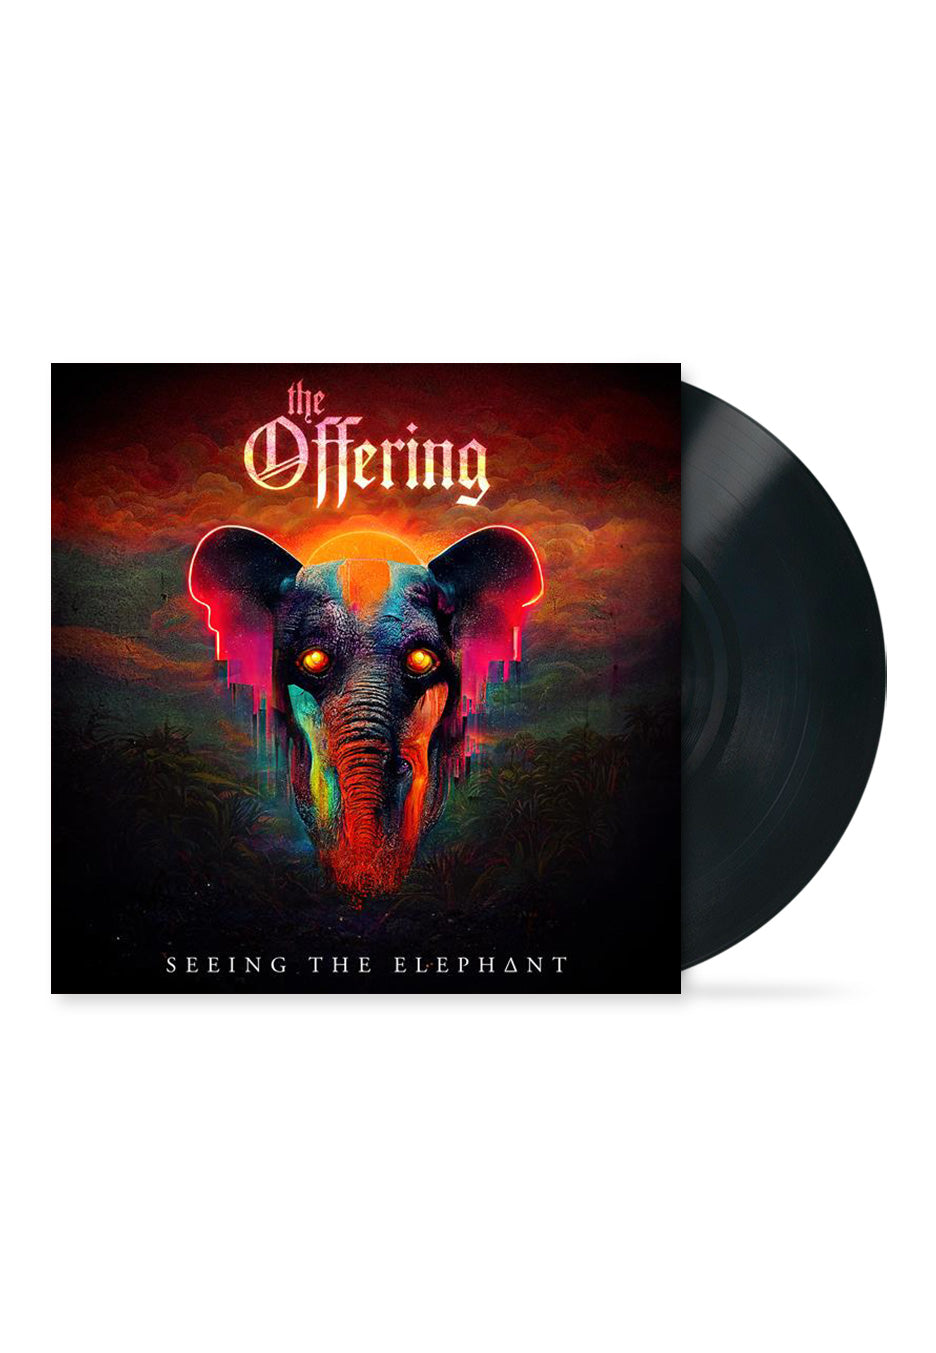 The Offering - Seeing The Elephant - Vinyl